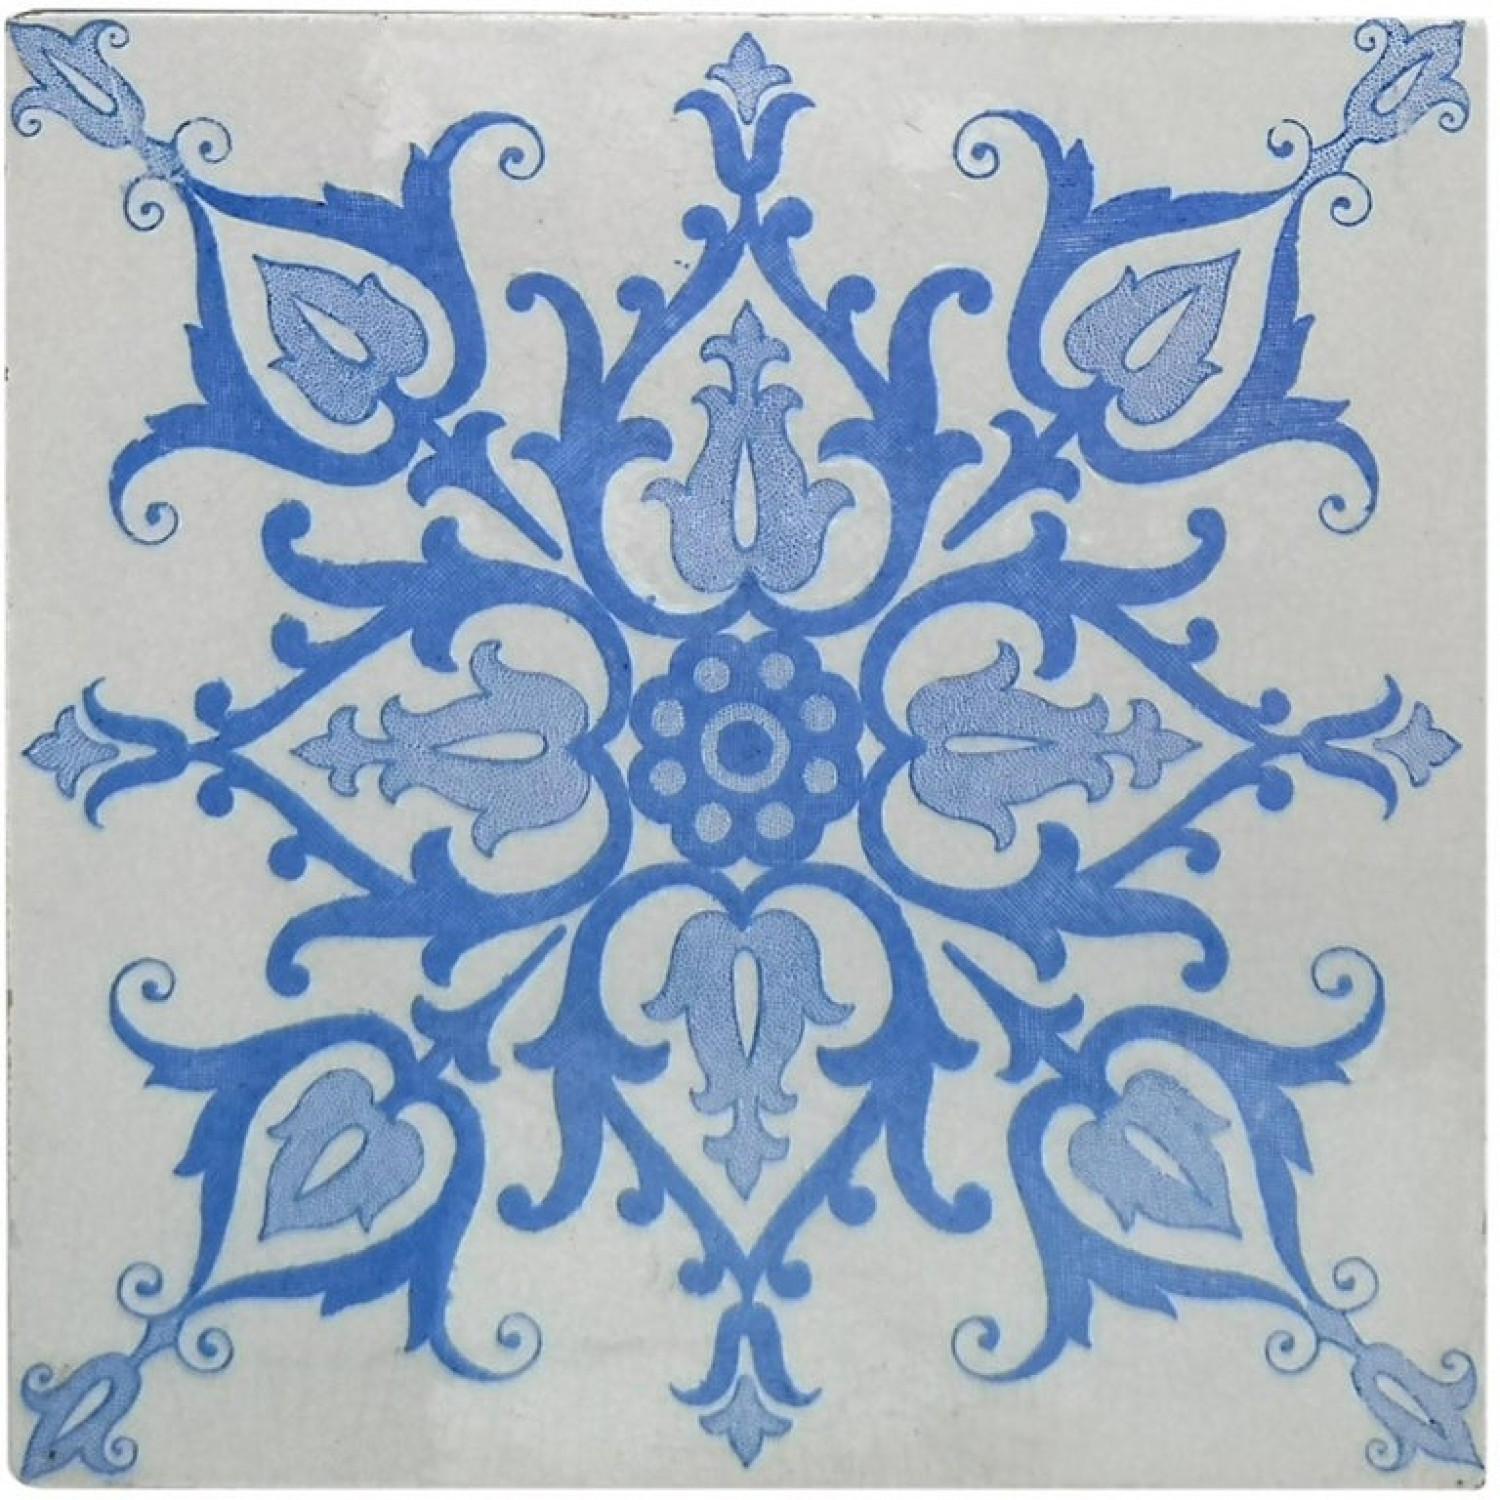 1 of the 140 glazed ceramic tiles tiles by Boch Freres, la Louvière, circa 1920's . Beautiful original antique blue and off-white tiles with a wonderful rich pattern.

The dimensions per tile are: 5.9 inch (15.2 cm) width x 5.9 inch (15.2 cm)